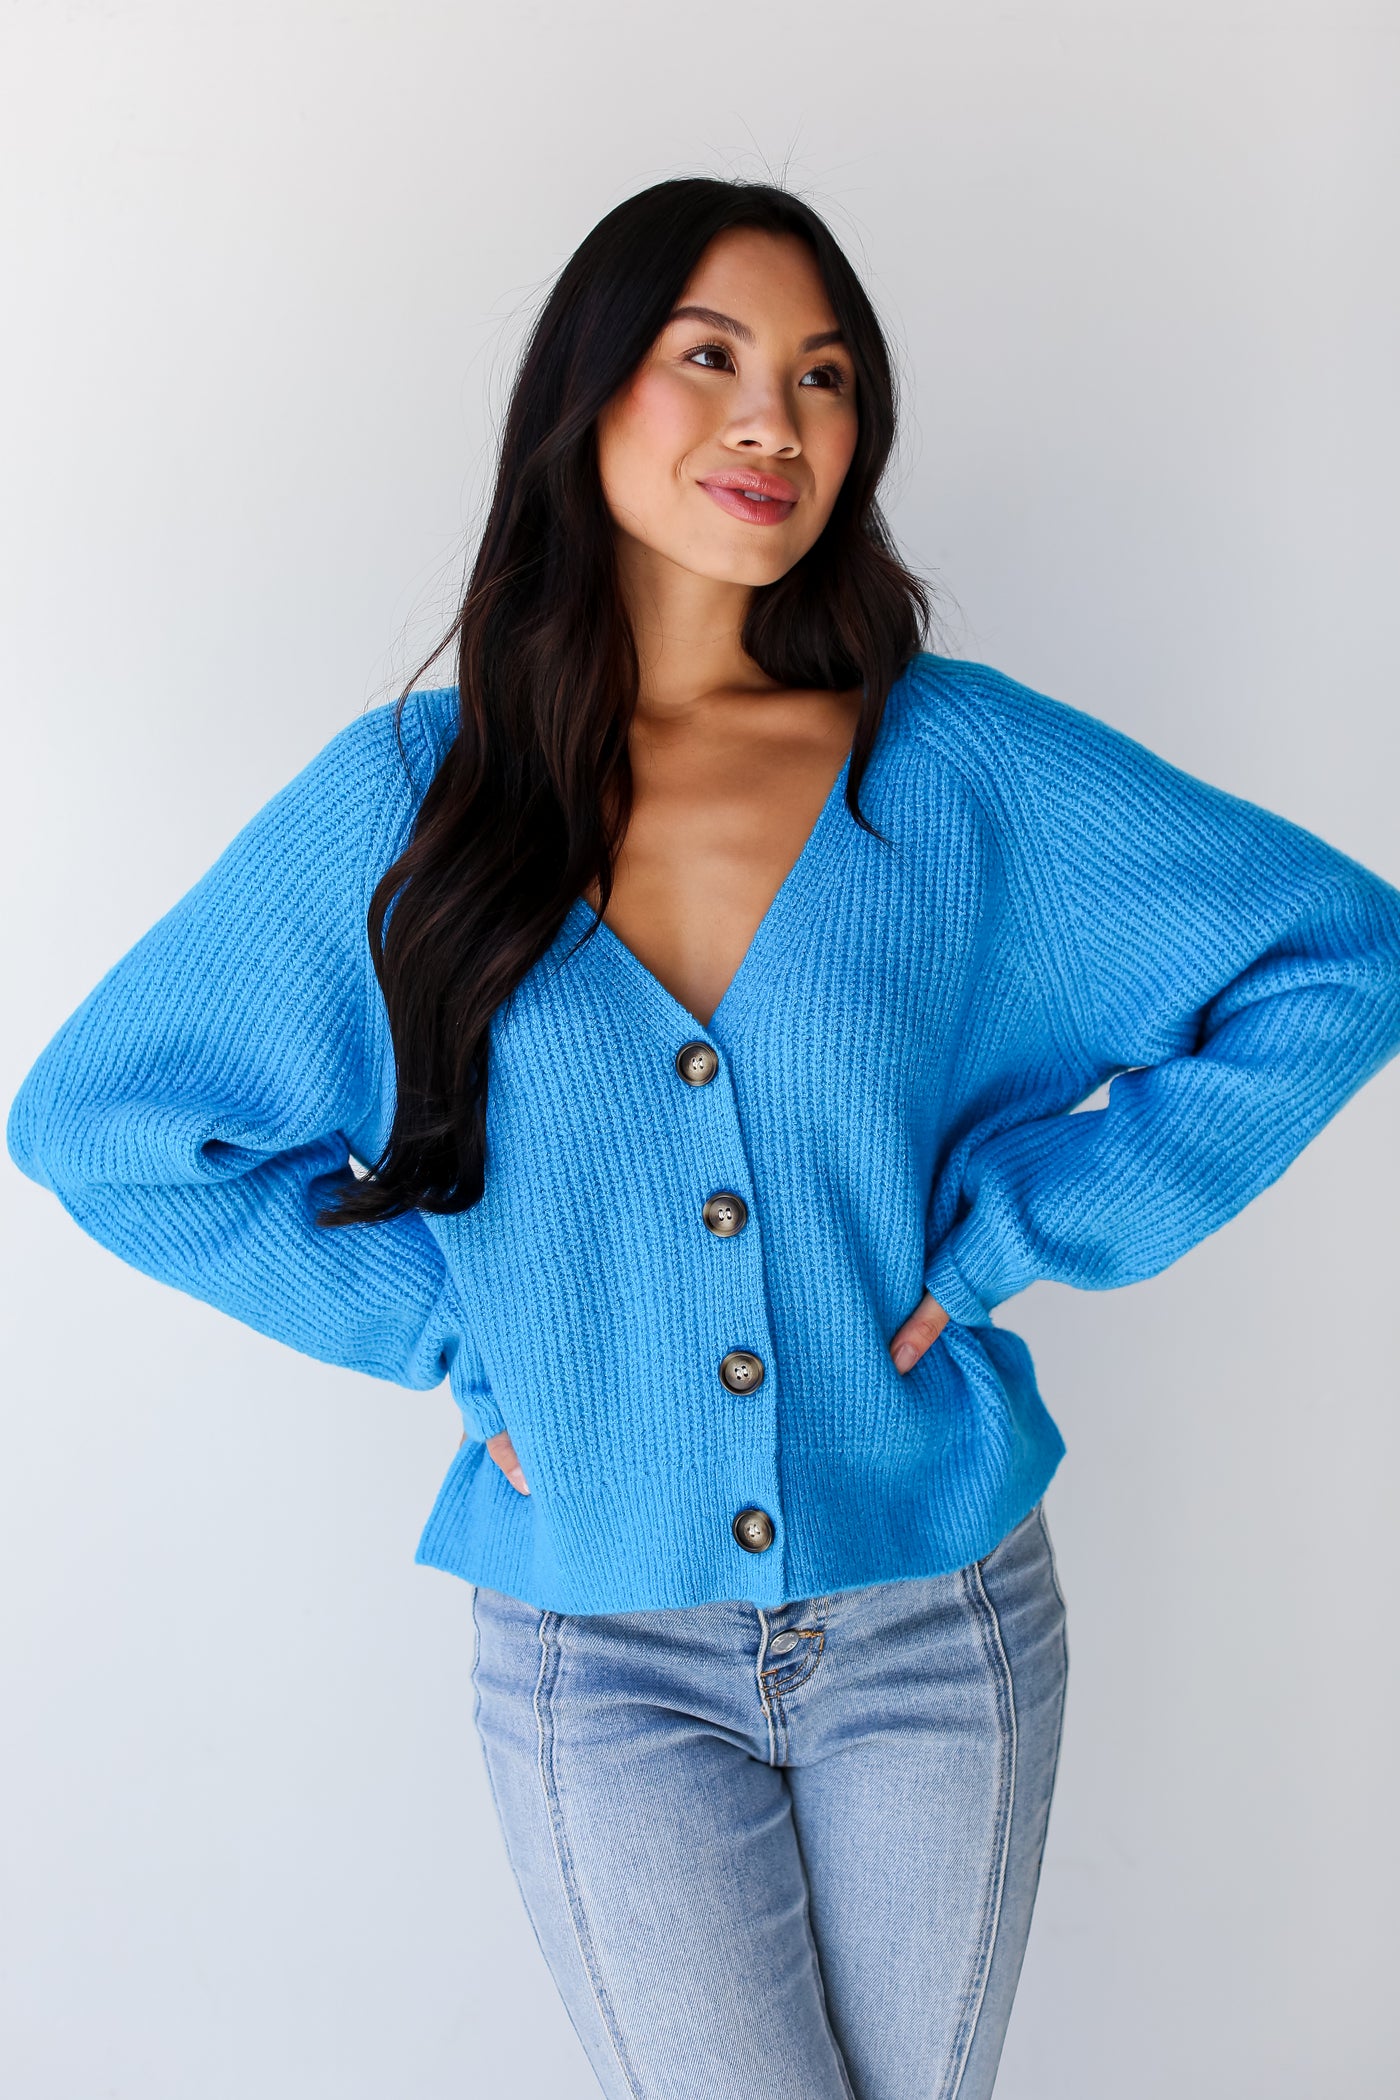 blue sweater for fall